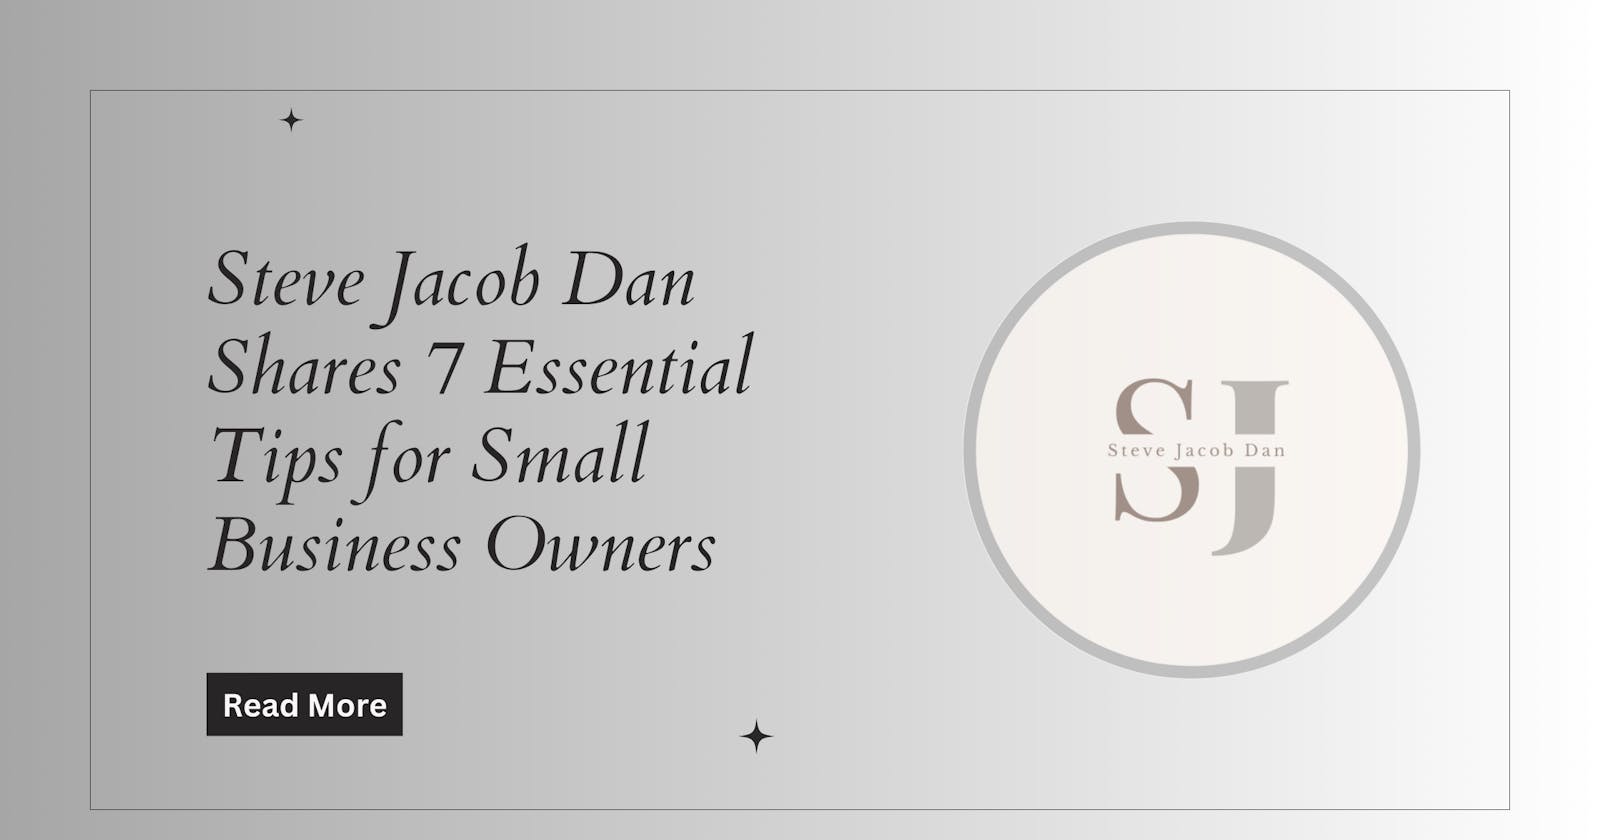 Steve Jacob Dan Shares 7 Essential Tips for Small Business Owners